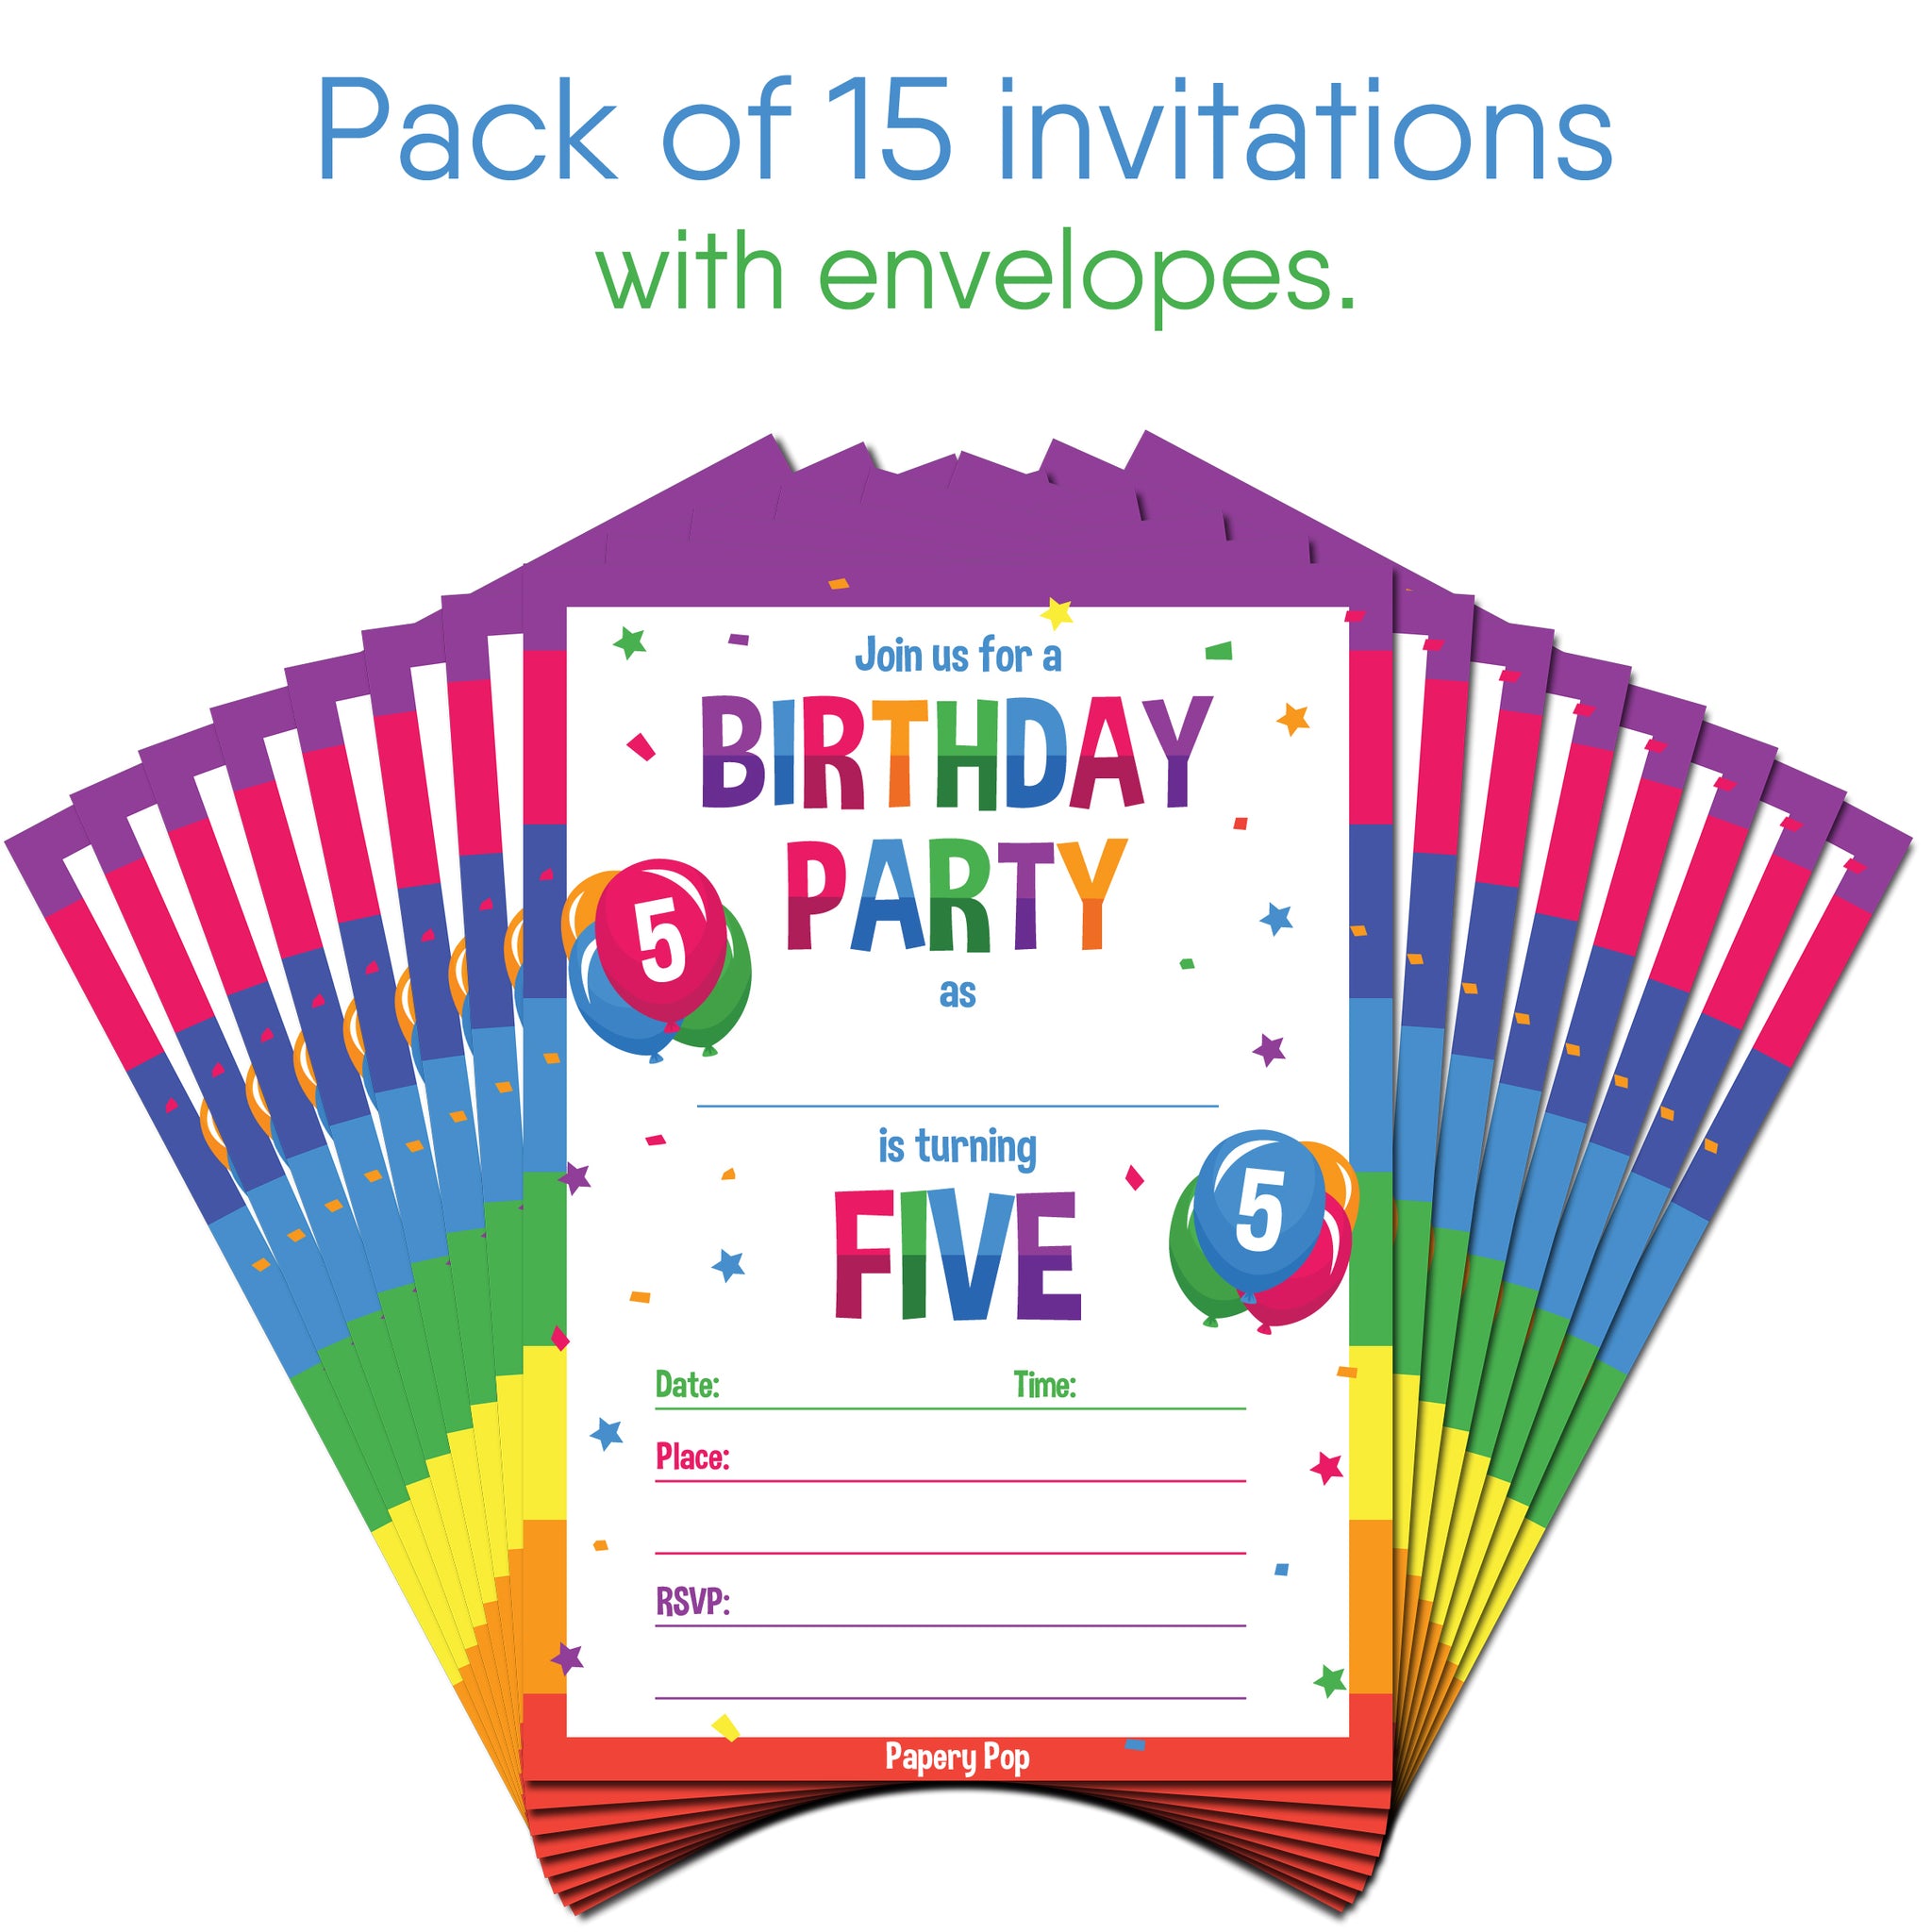 5 Year Old Birthday Party Invitations with Envelopes (15 Count) - Kids